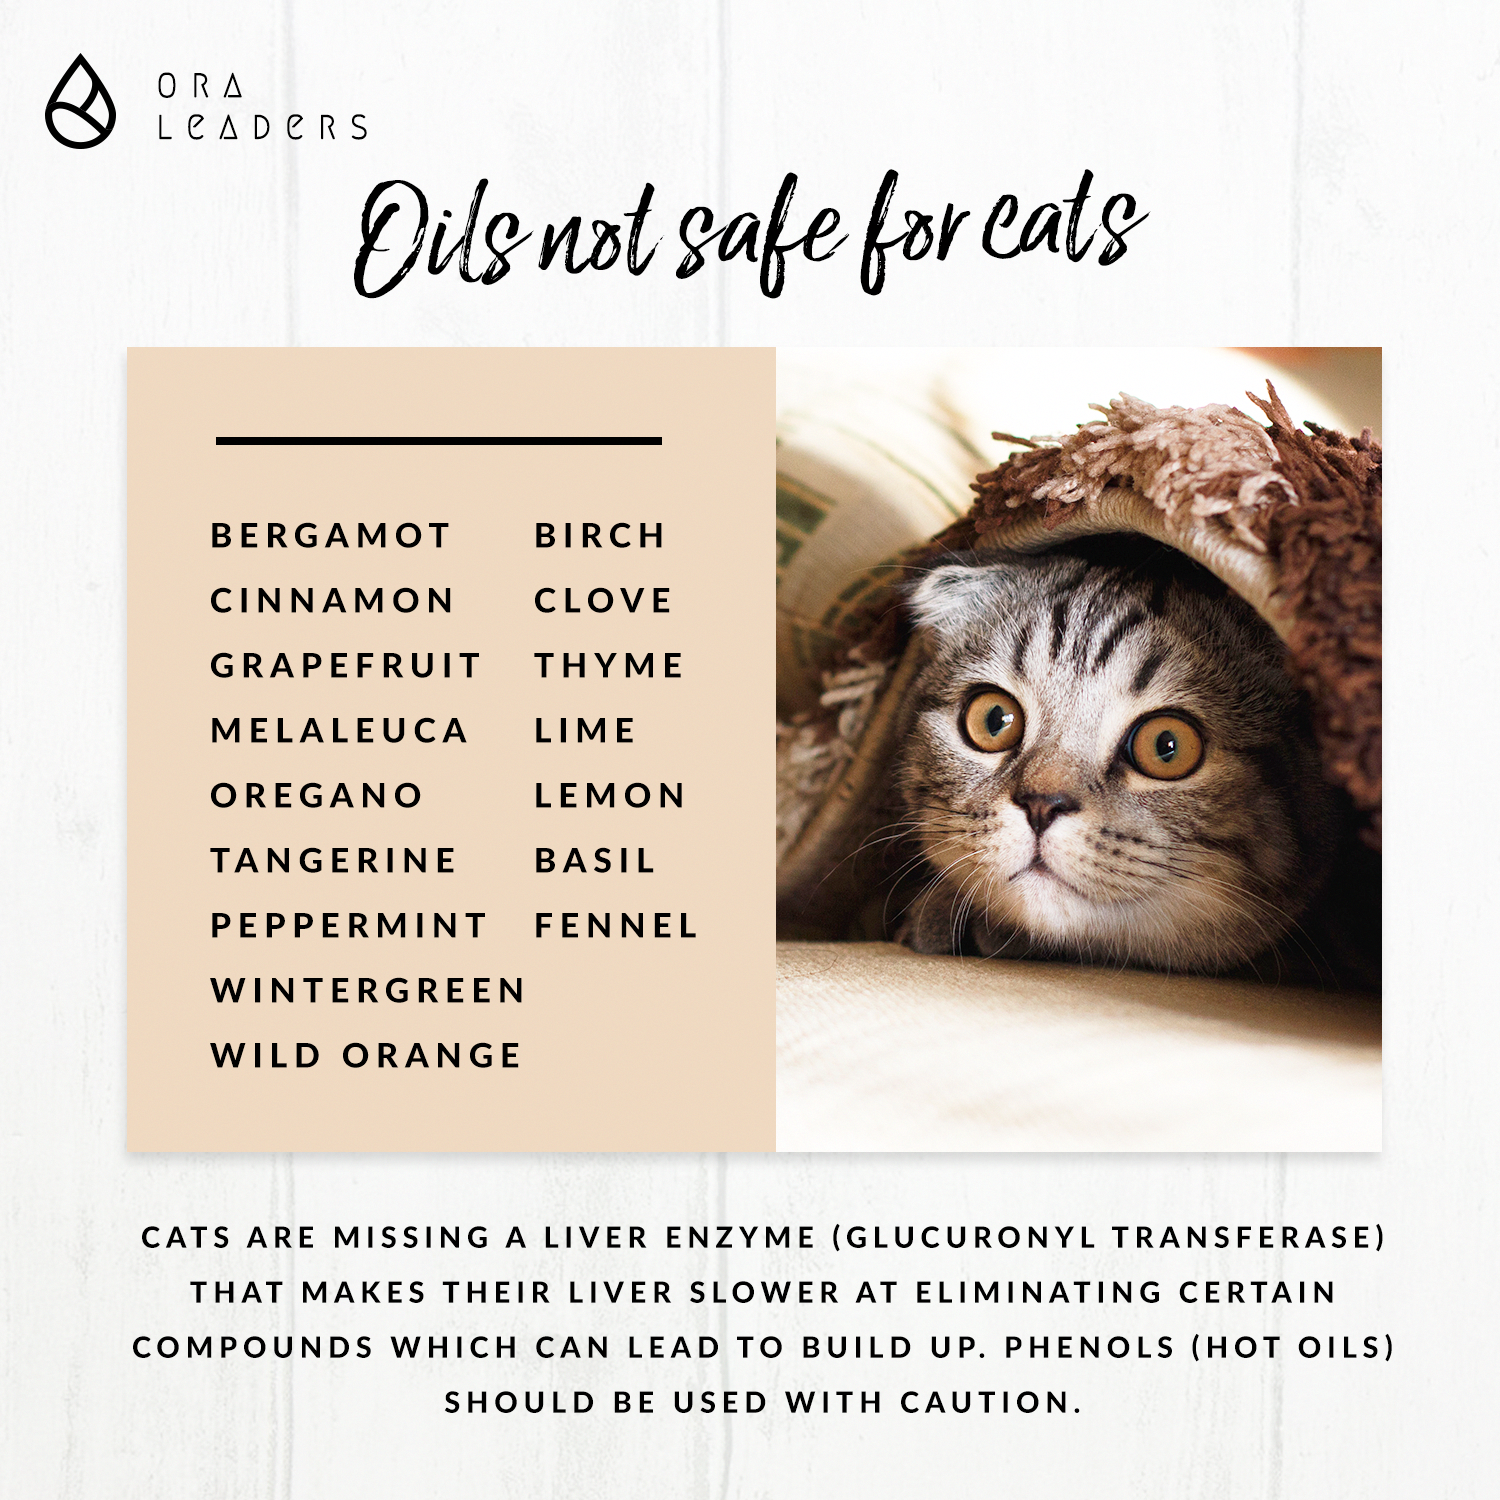 Oils not safe for cats